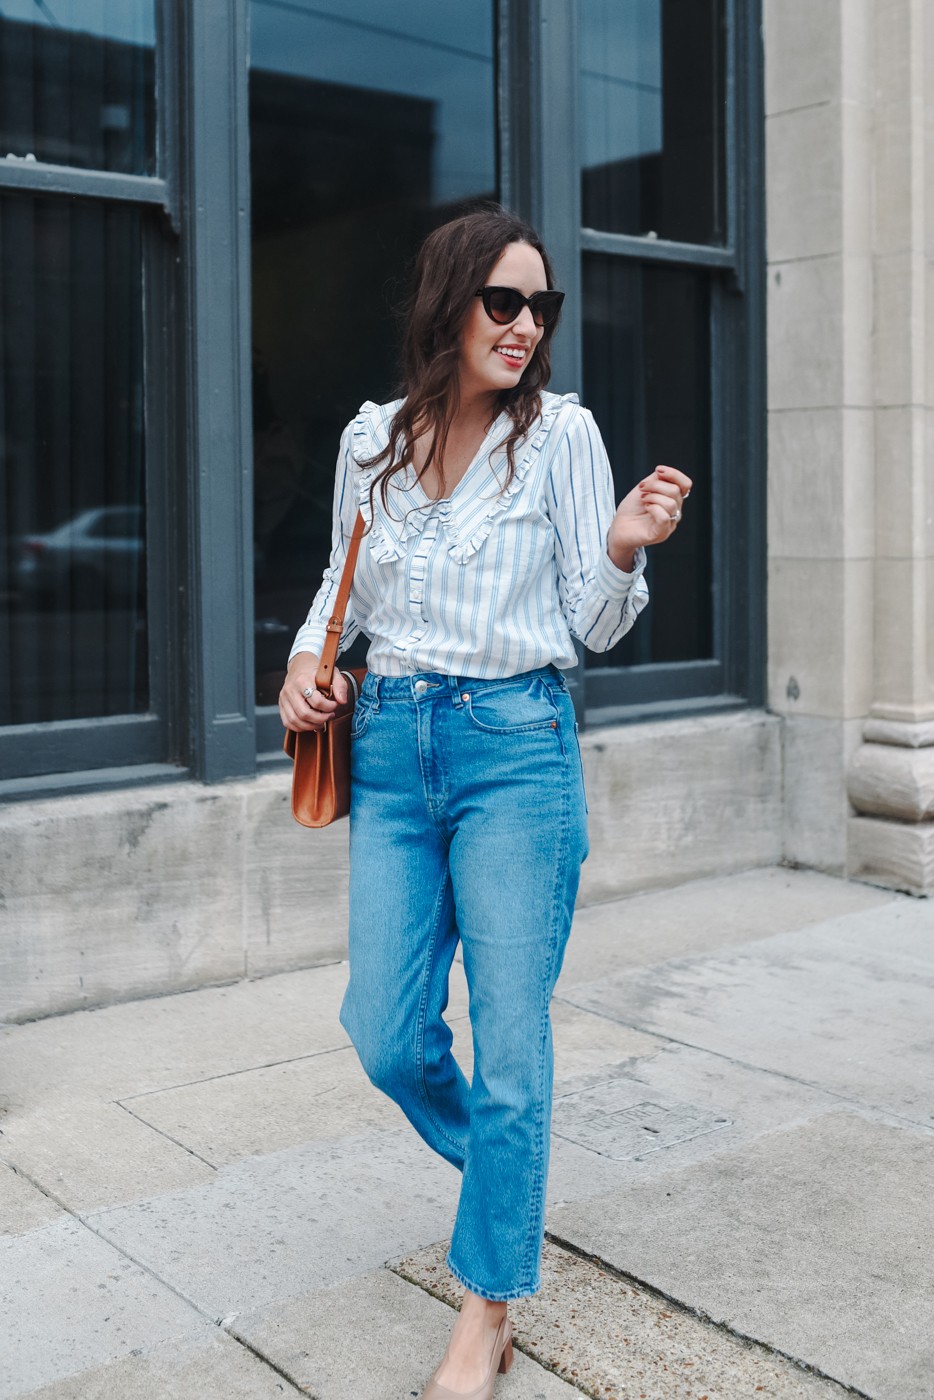 Ruffled Collar Shirts styled by top Memphis fashion blogger, Lone Star Looking Glass: image of a woman wearing an Anthropologie ruffled shirt